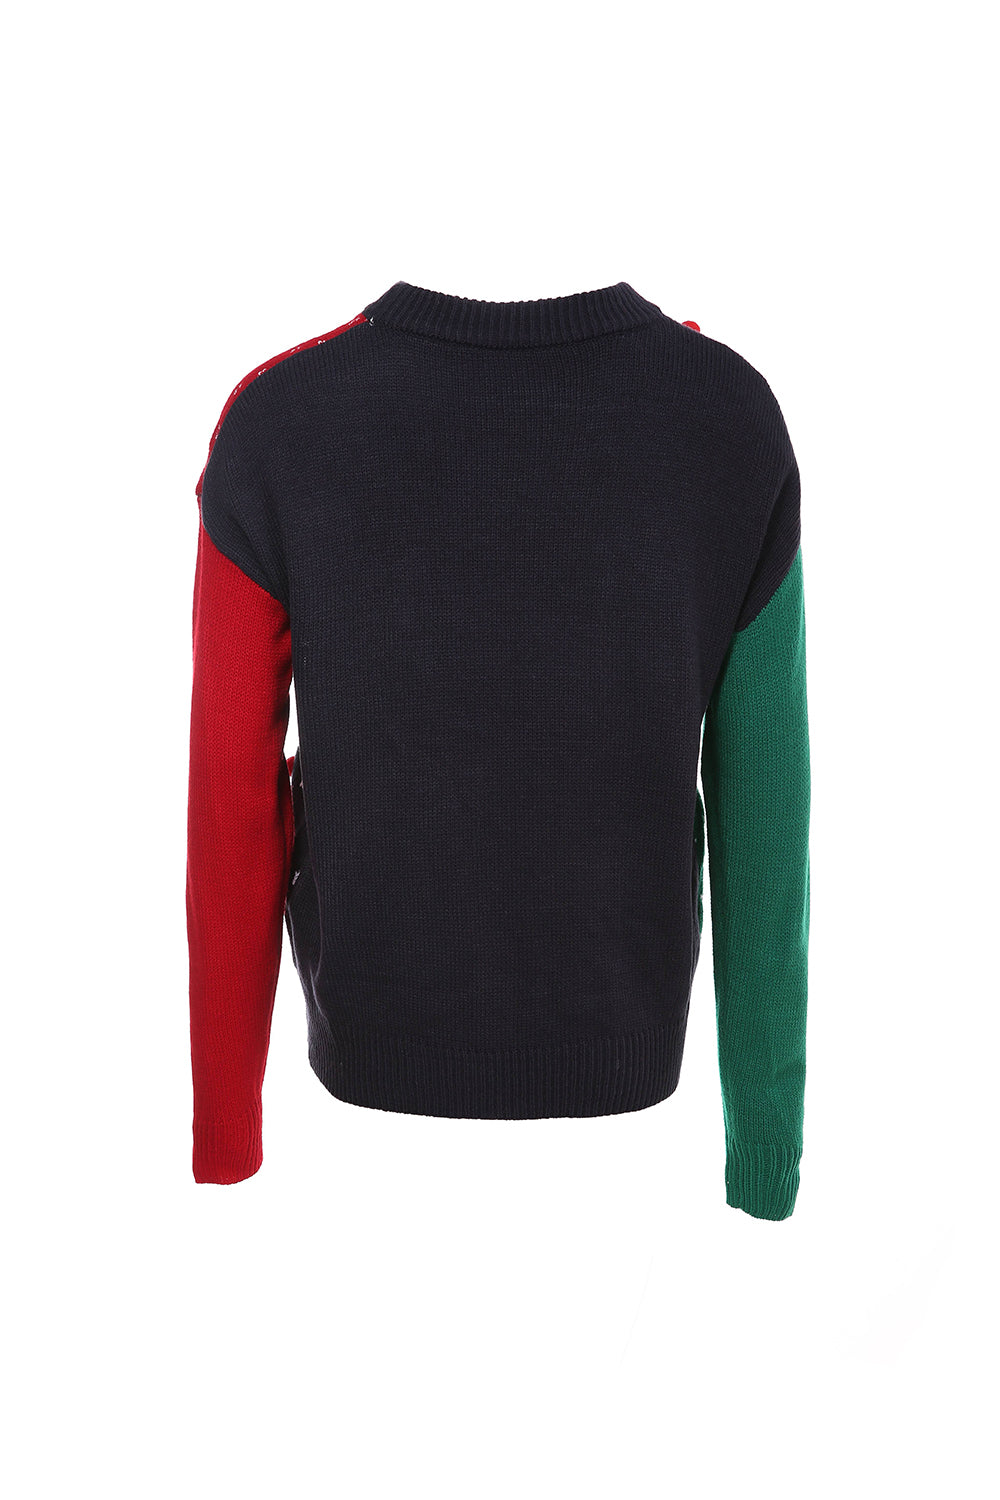 Women's Christmas Color Block Pull Over Knitted Sweater